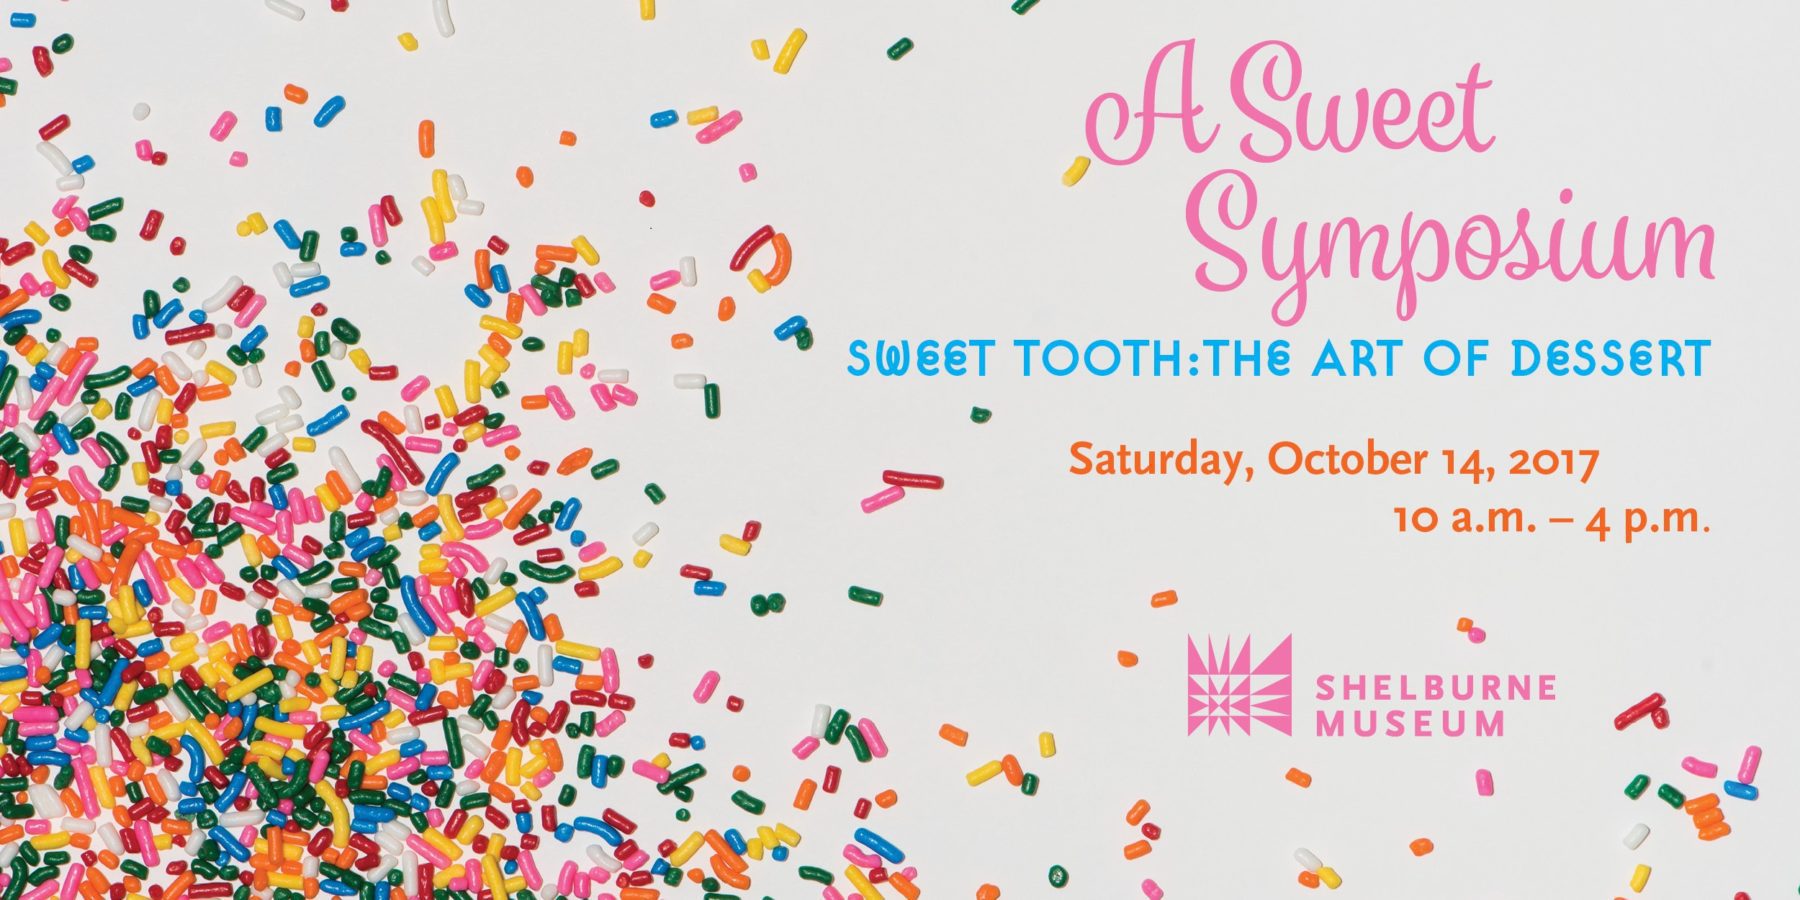 A “Sweet” Symposium exploring Sweet Tooth: The Art of Dessert.